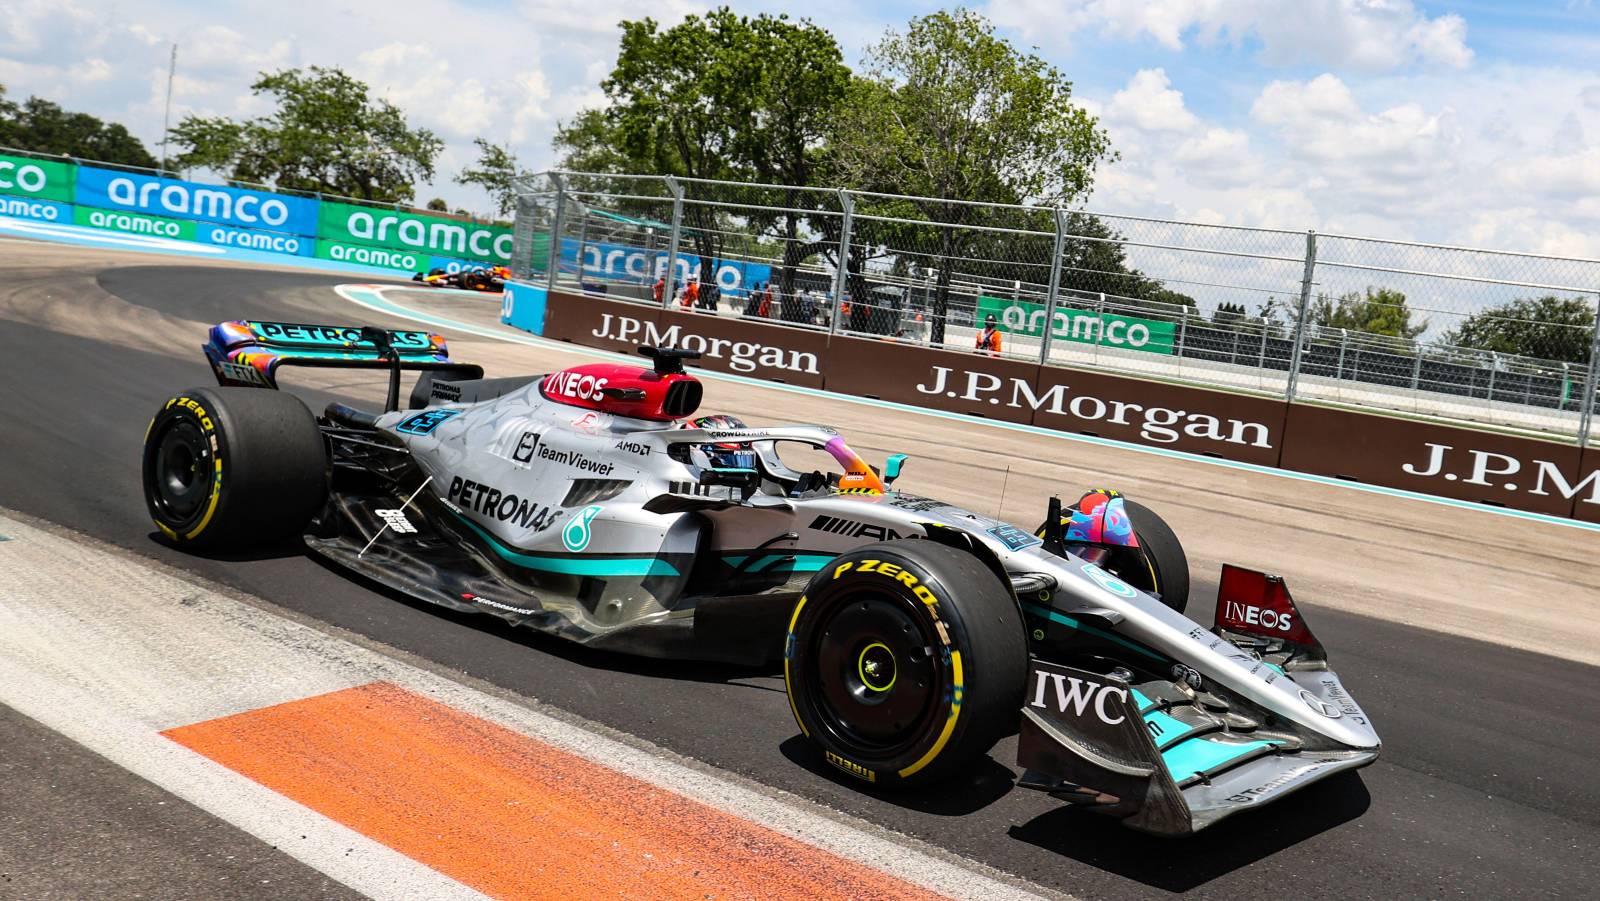 Belgian GP LIVE: Lewis Hamilton sets new TARGET for Mercedes, aims to WIN races in second half of the season - Check Out